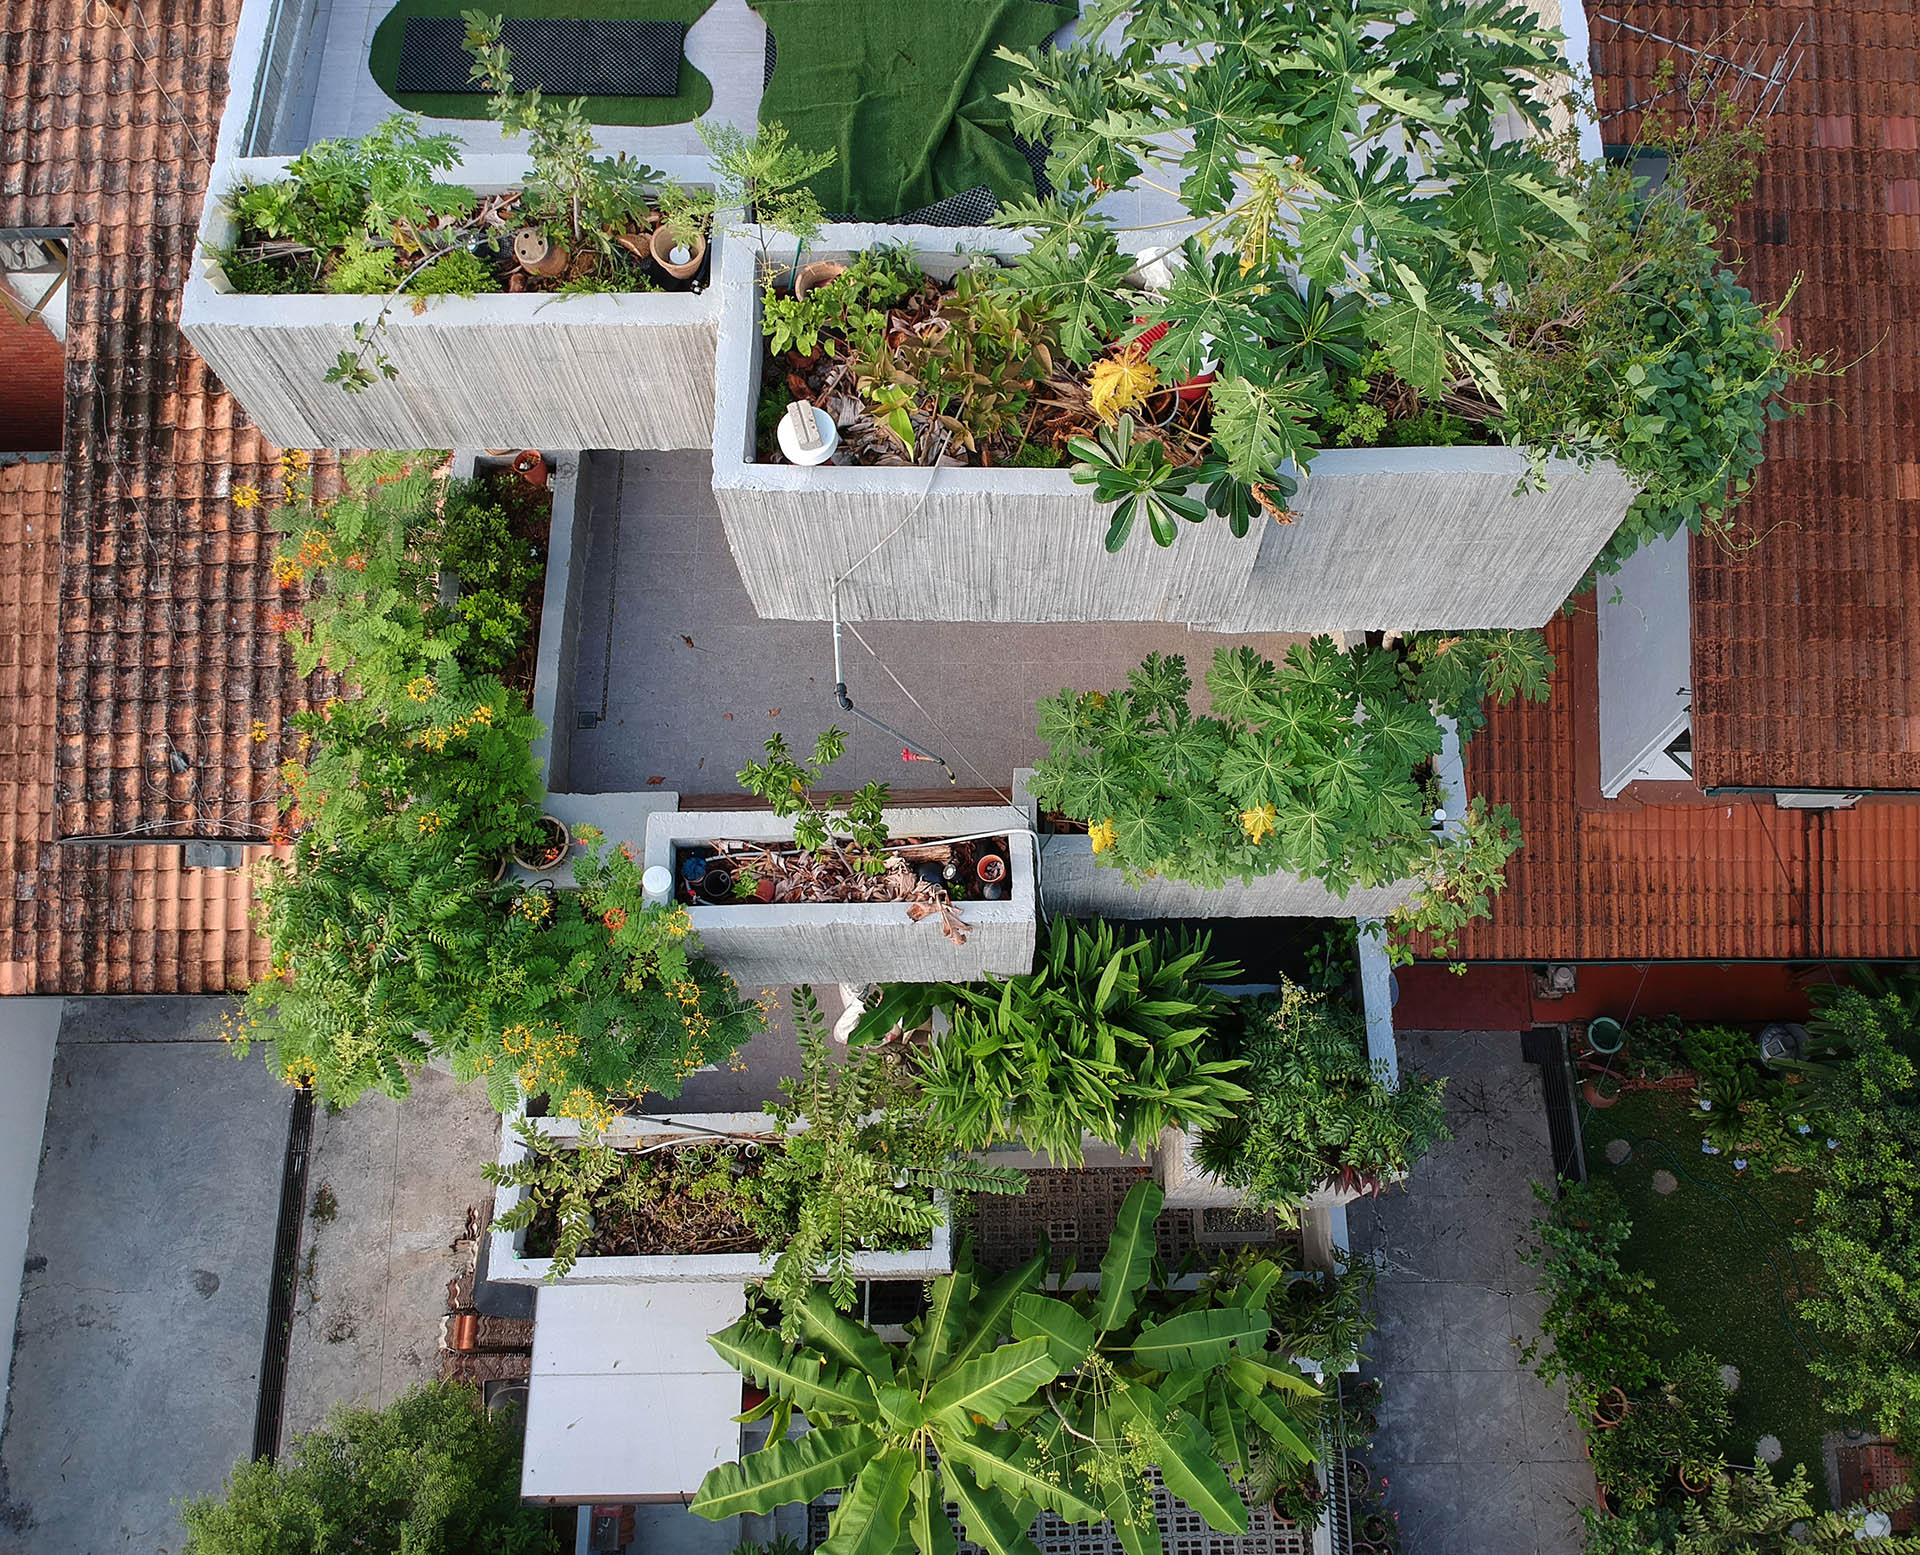 <p>The plantings are watered through a custom-made irrigation system, allowing the owners to conduct their experiments with urban farming and self-sufficient living.&nbsp;&nbsp;</p>